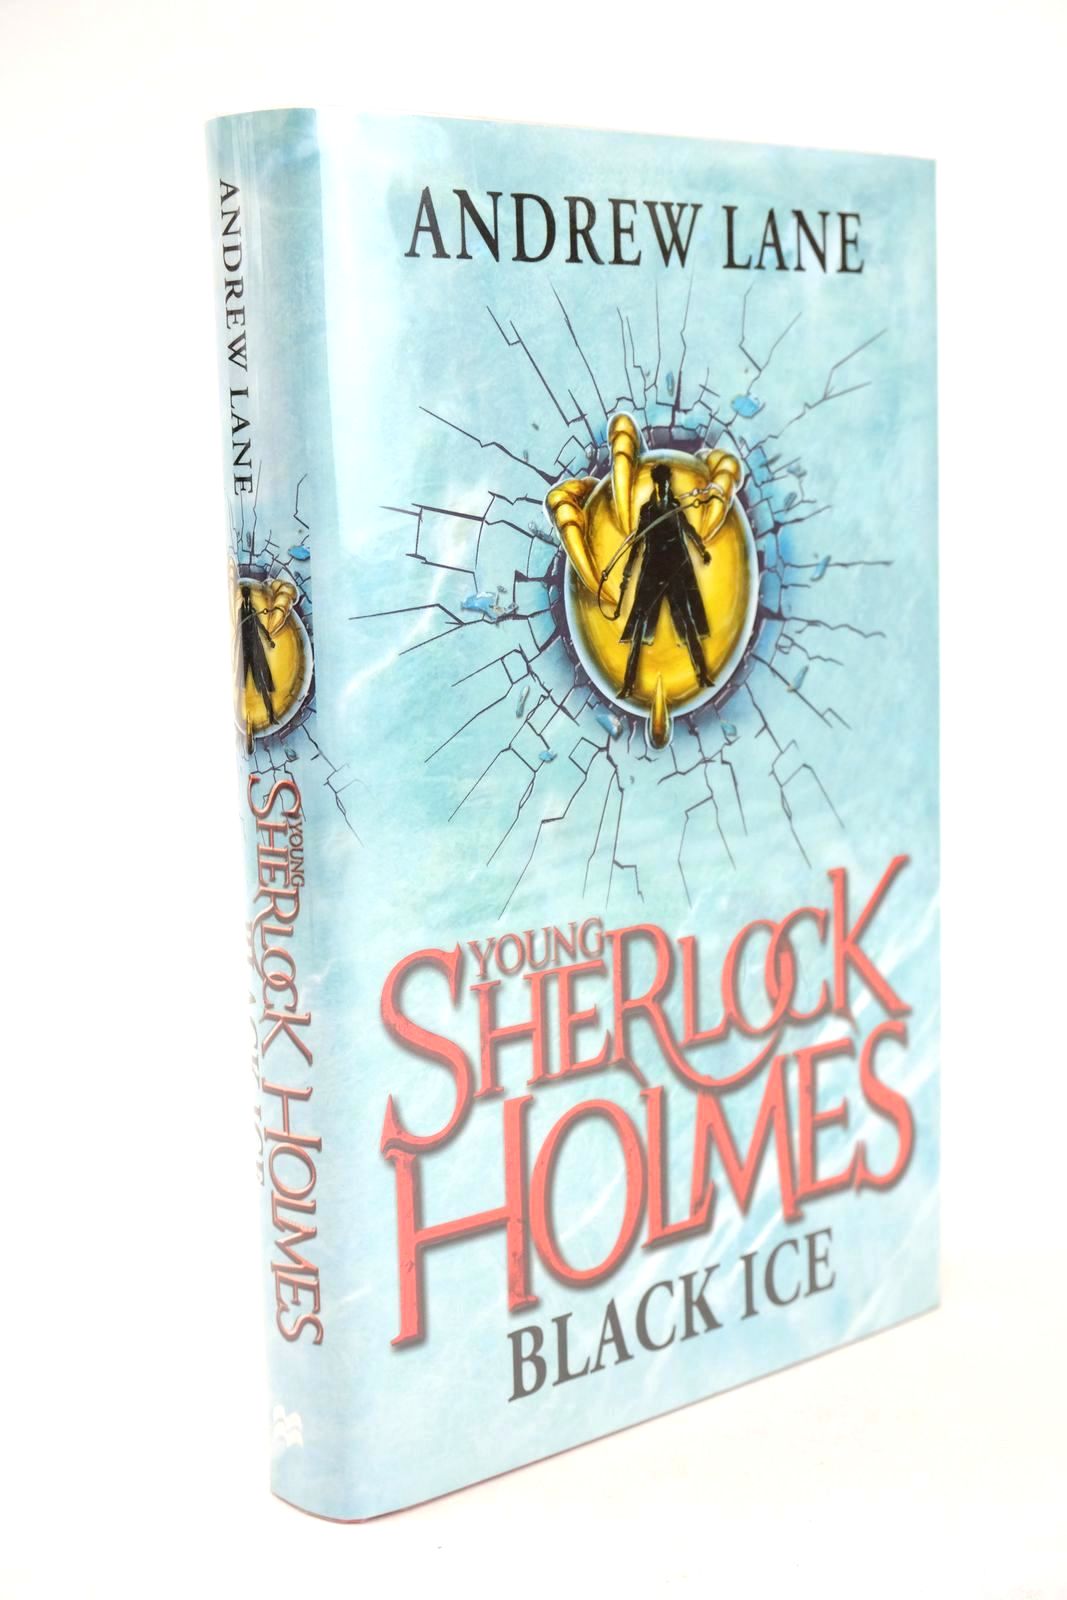 Photo of YOUNG SHERLOCK HOLMES - BLACK ICE- Stock Number: 1325748